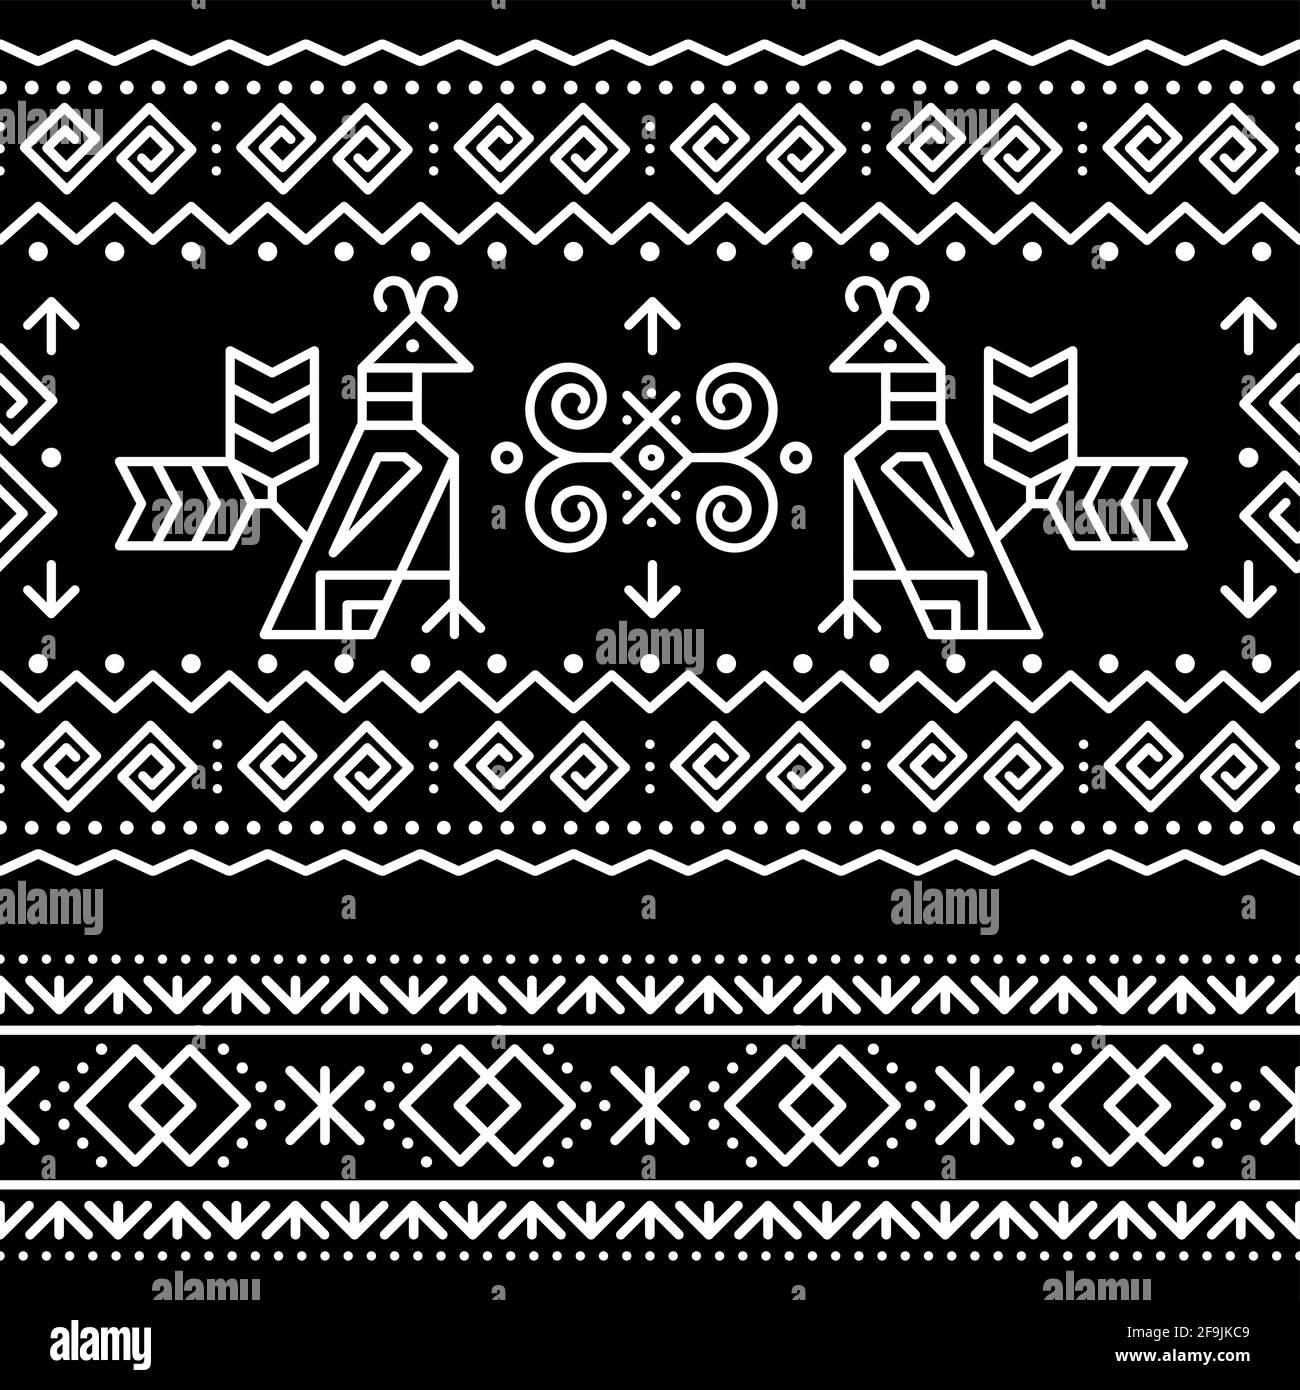 Slovak tribal folk art vector seamless geometric two patterns with brids swirls, zig-zag shapes inspired by traditional painted art from village Cicma Stock Vector